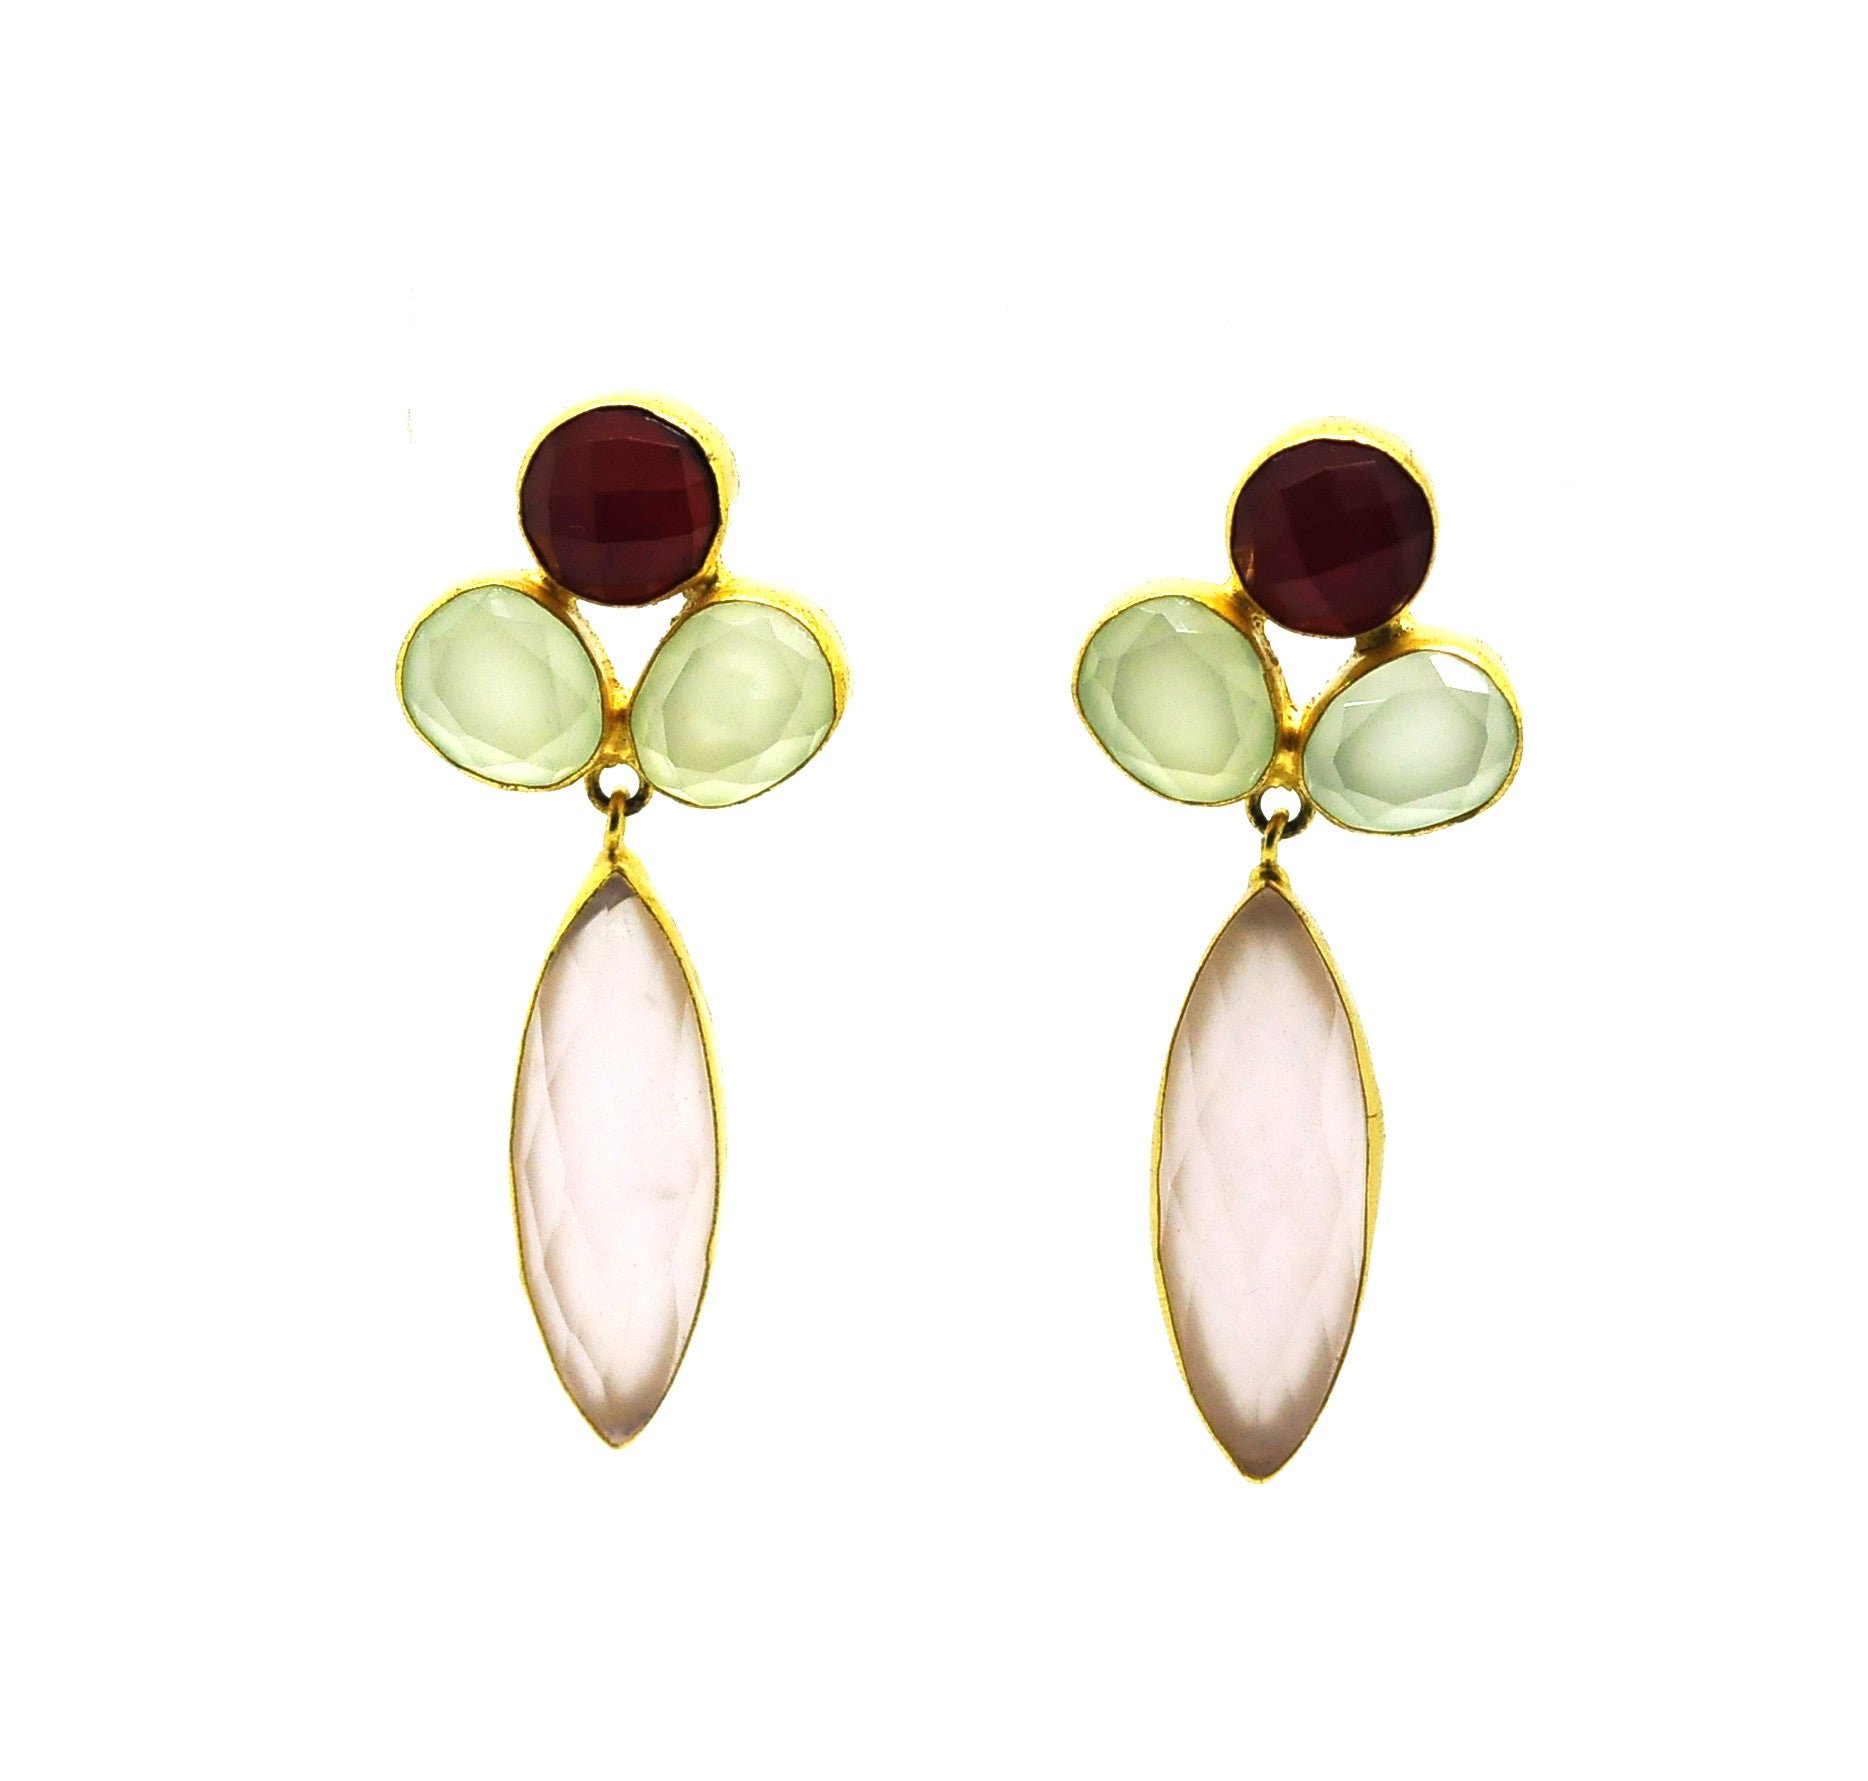 FOR RAYAN -  Mixed gemstone earring